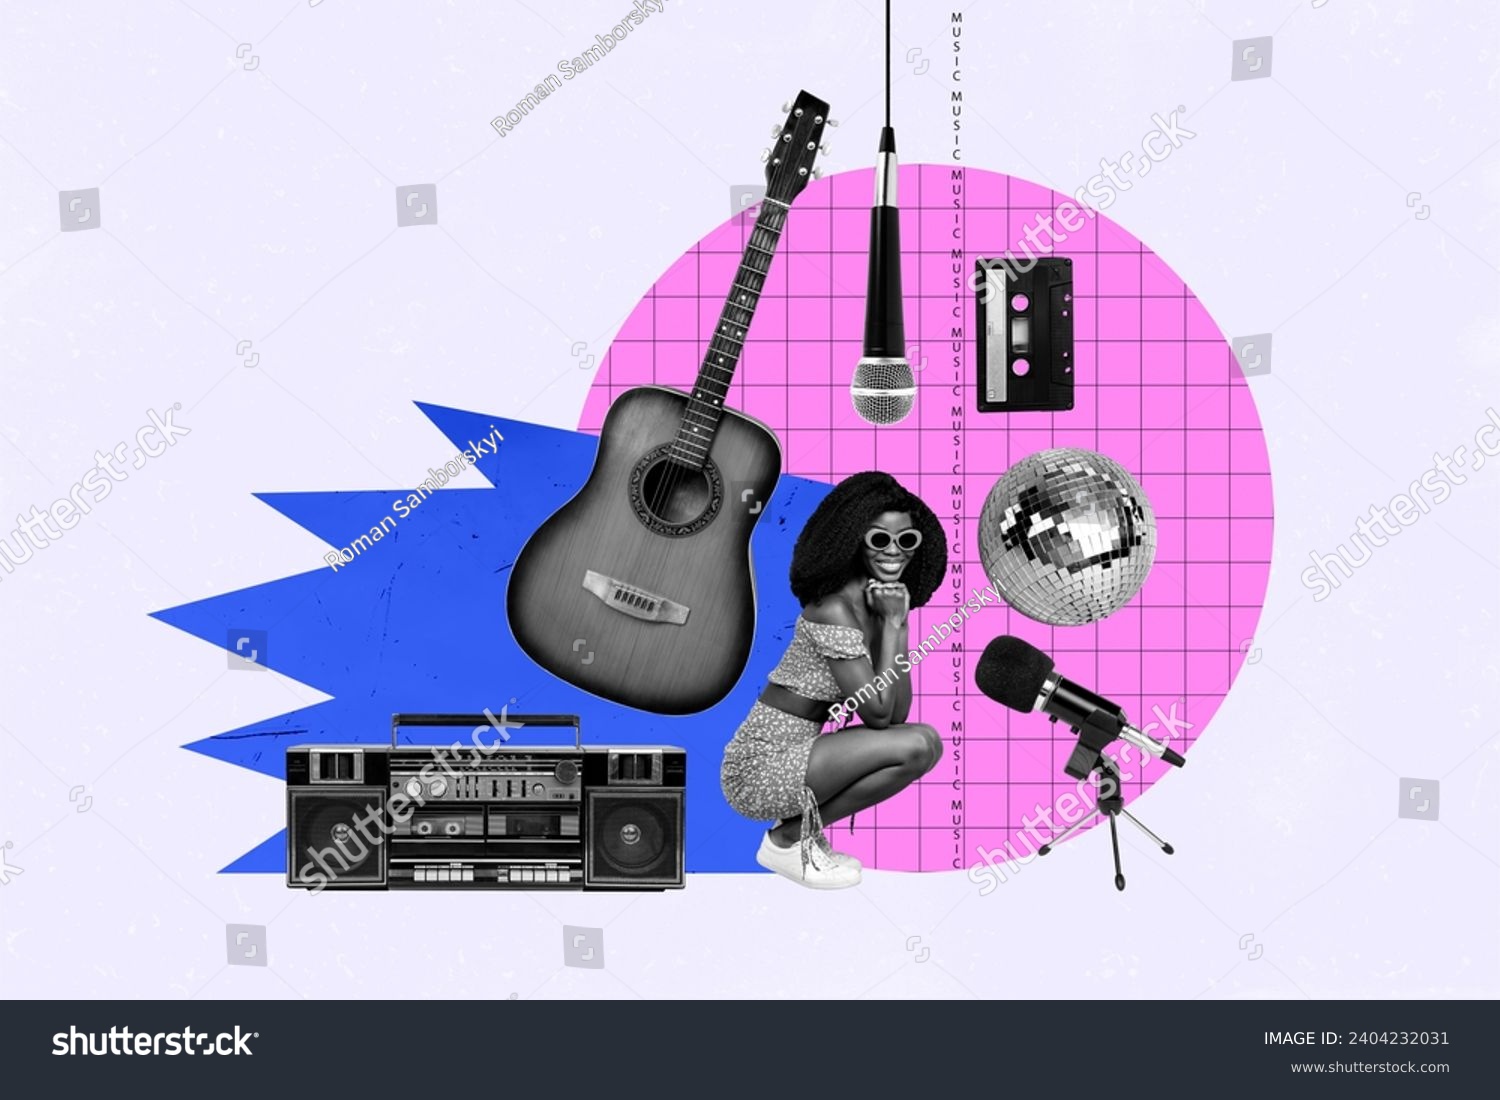 Collage photo illistration poster funky young girl 90s retro stylish club music equipment guitar microphone boombox discoball party #2404232031